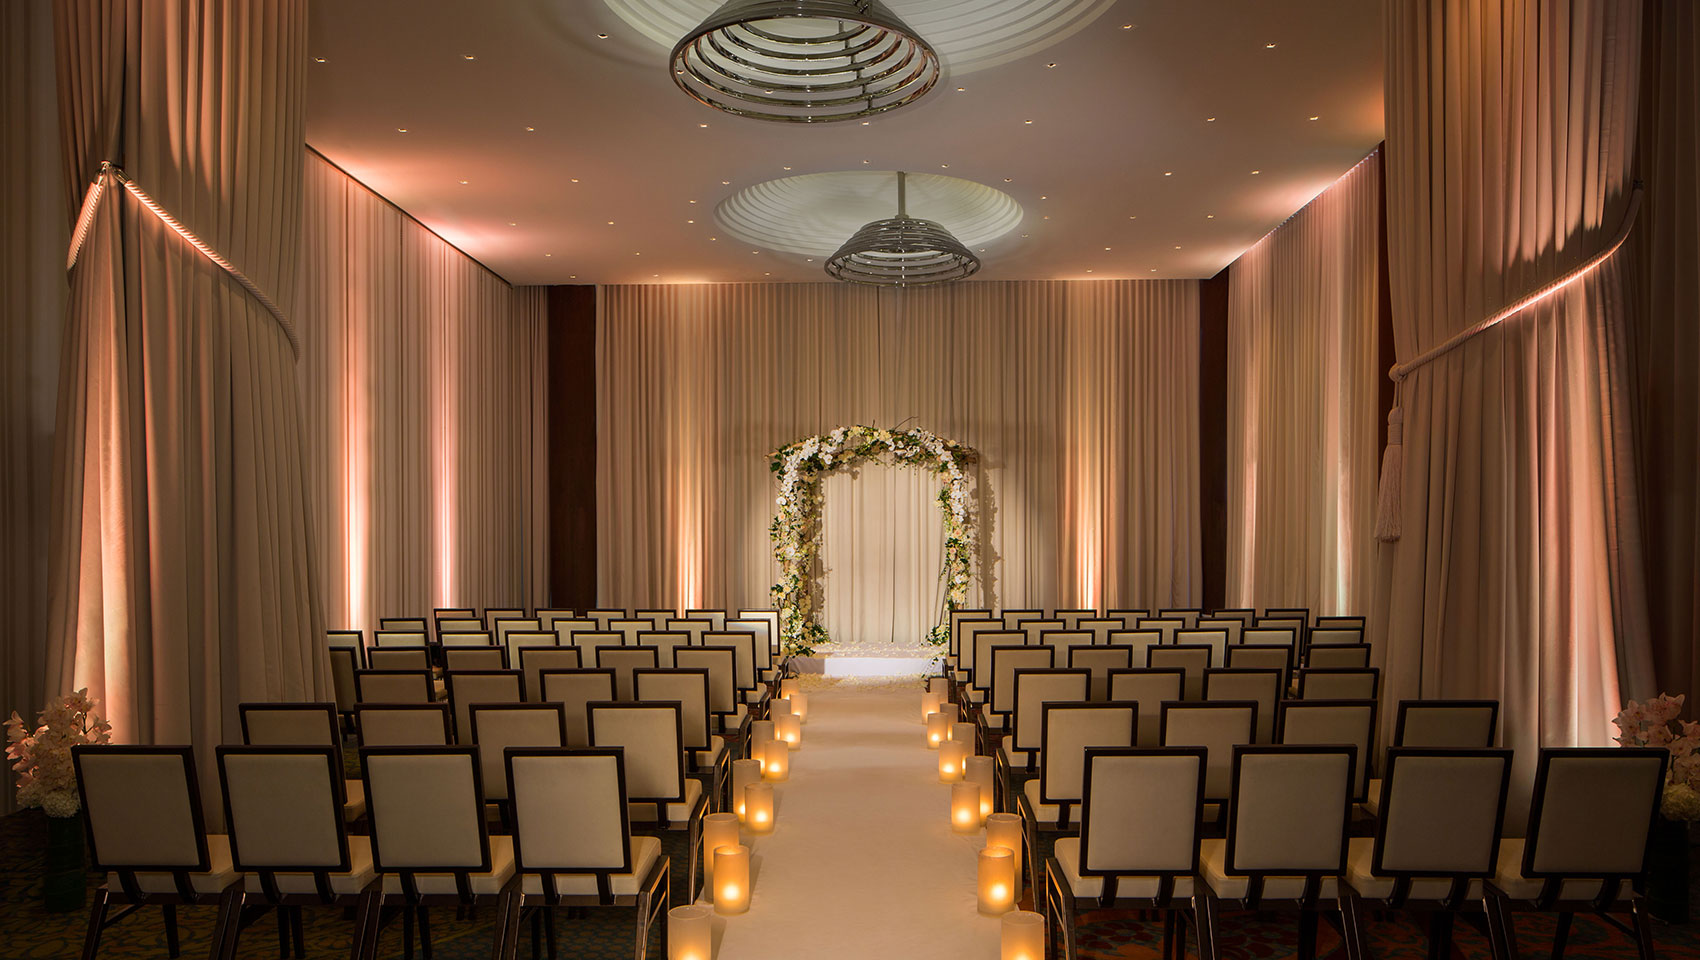 Ventana I wedding set up with chairs facing altar in room with curtains and high ceilings